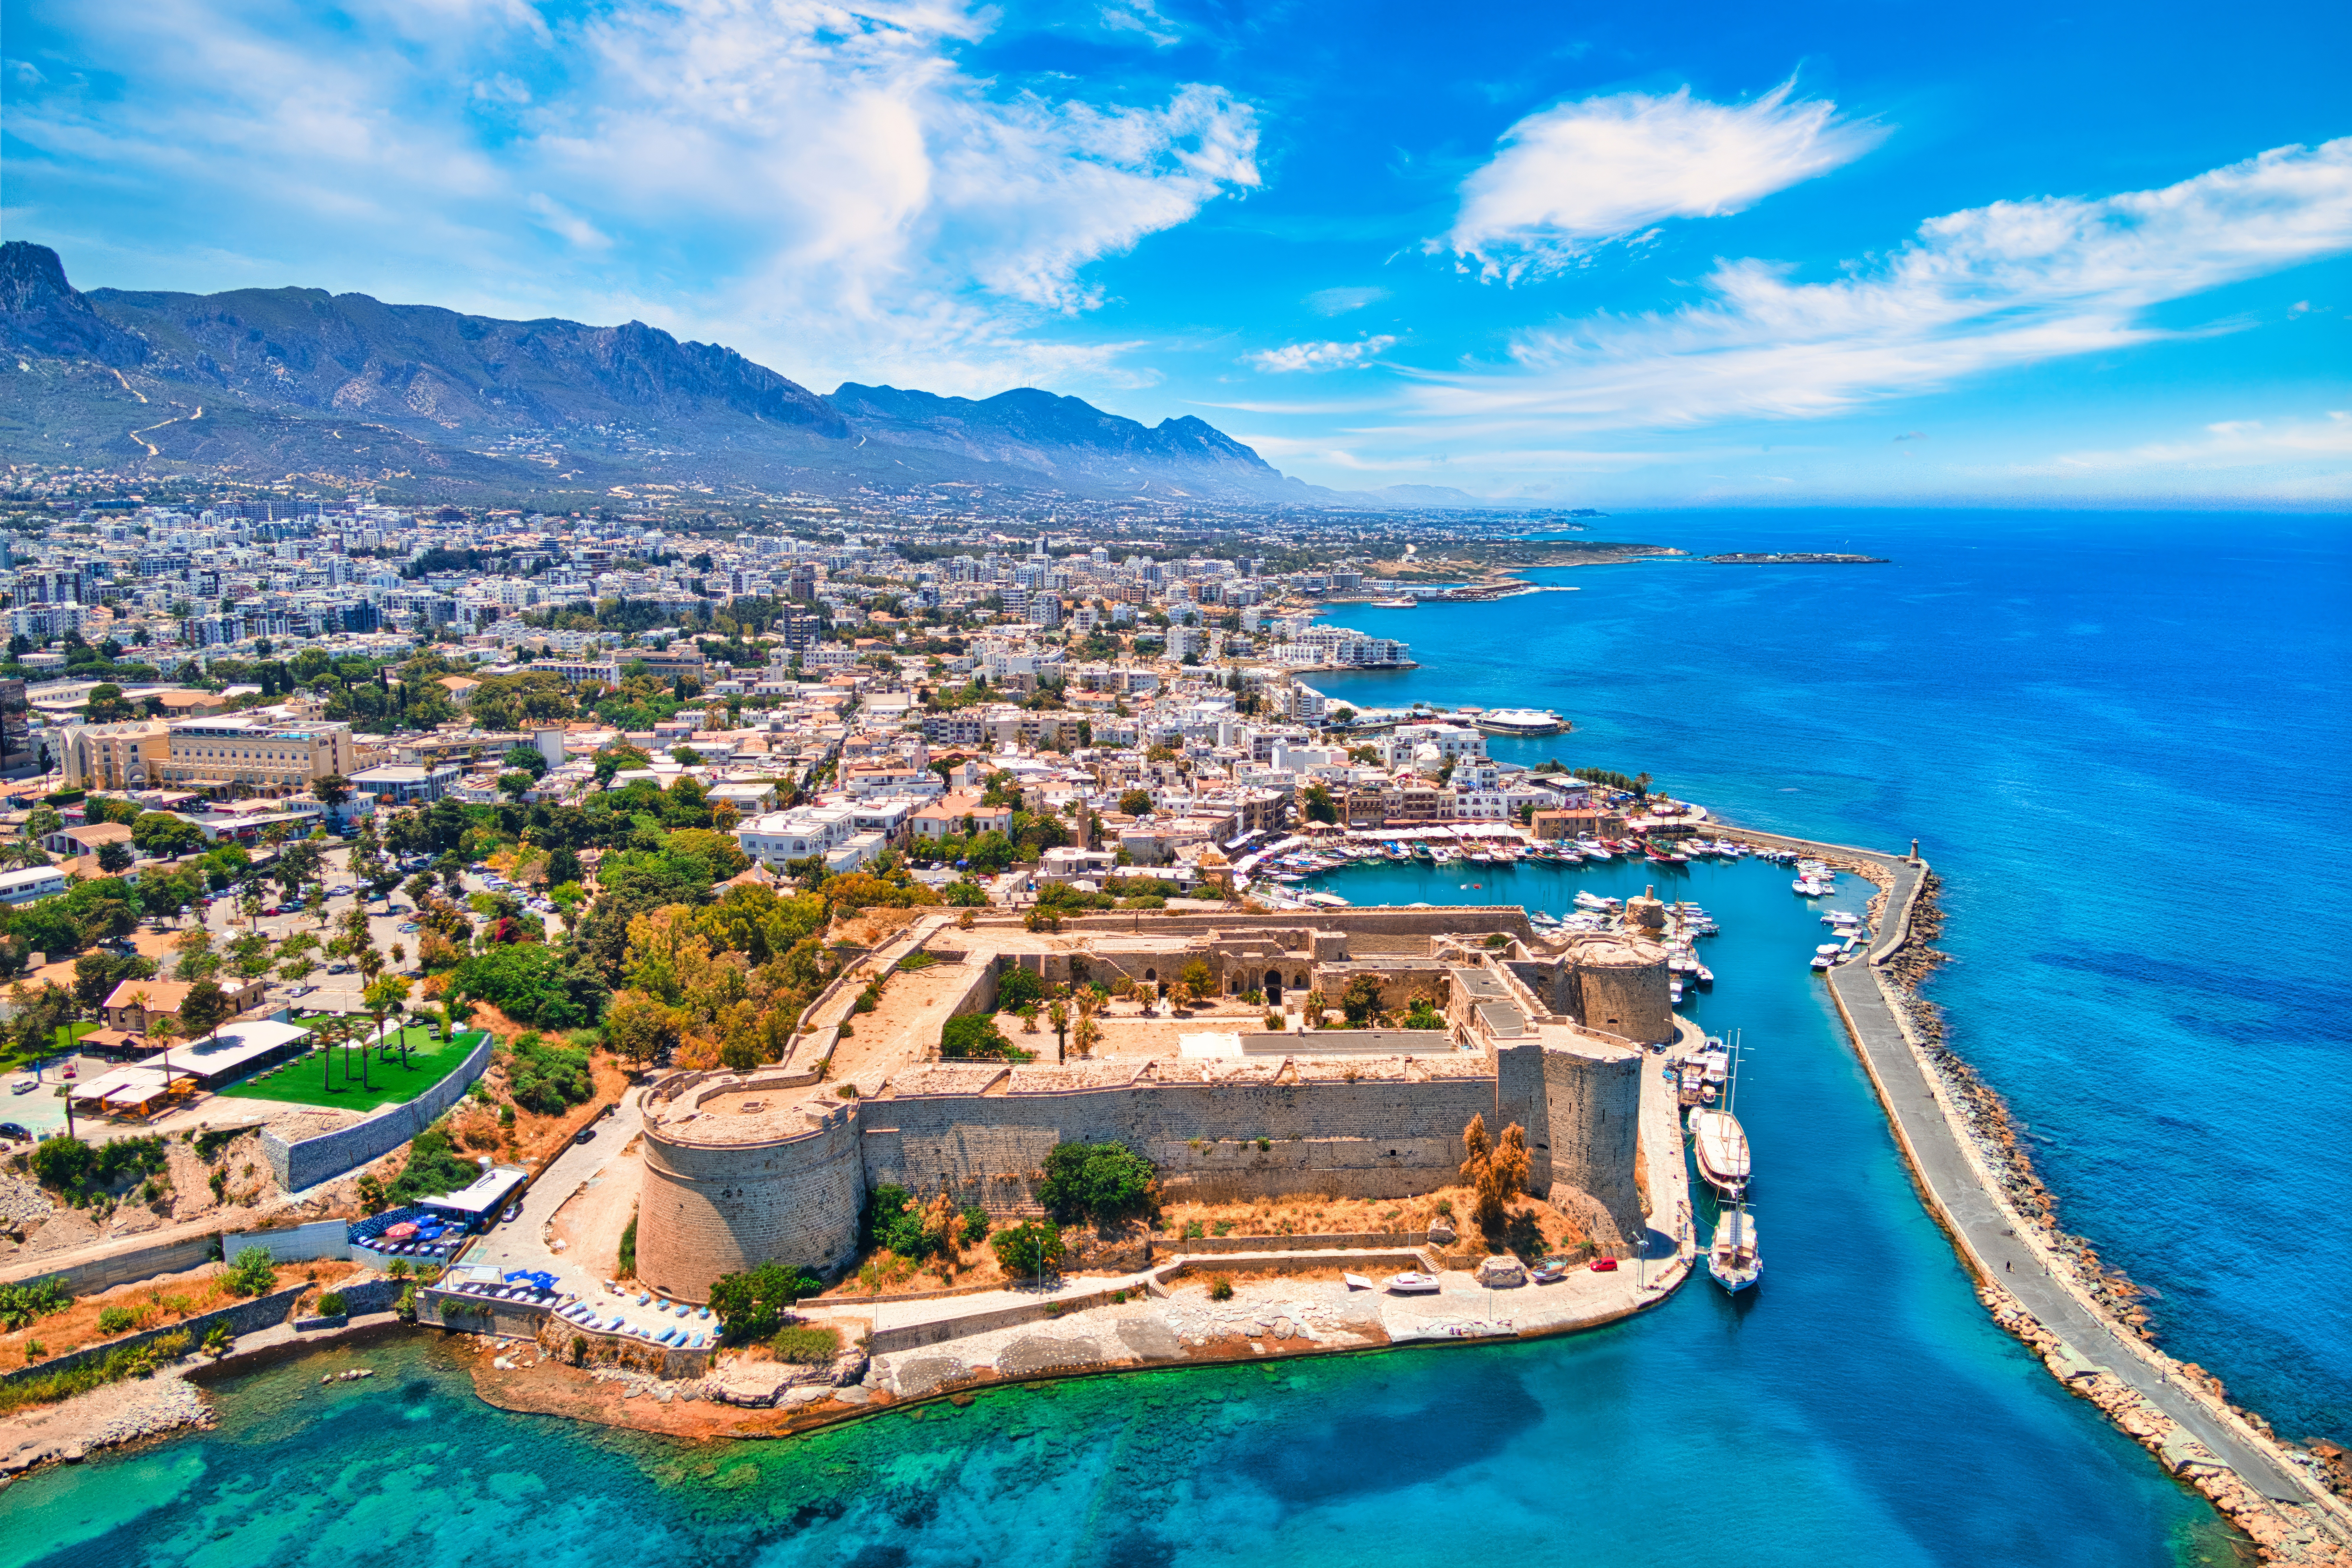 Cyprus residence permit allows foreigners to live in a beautiful country